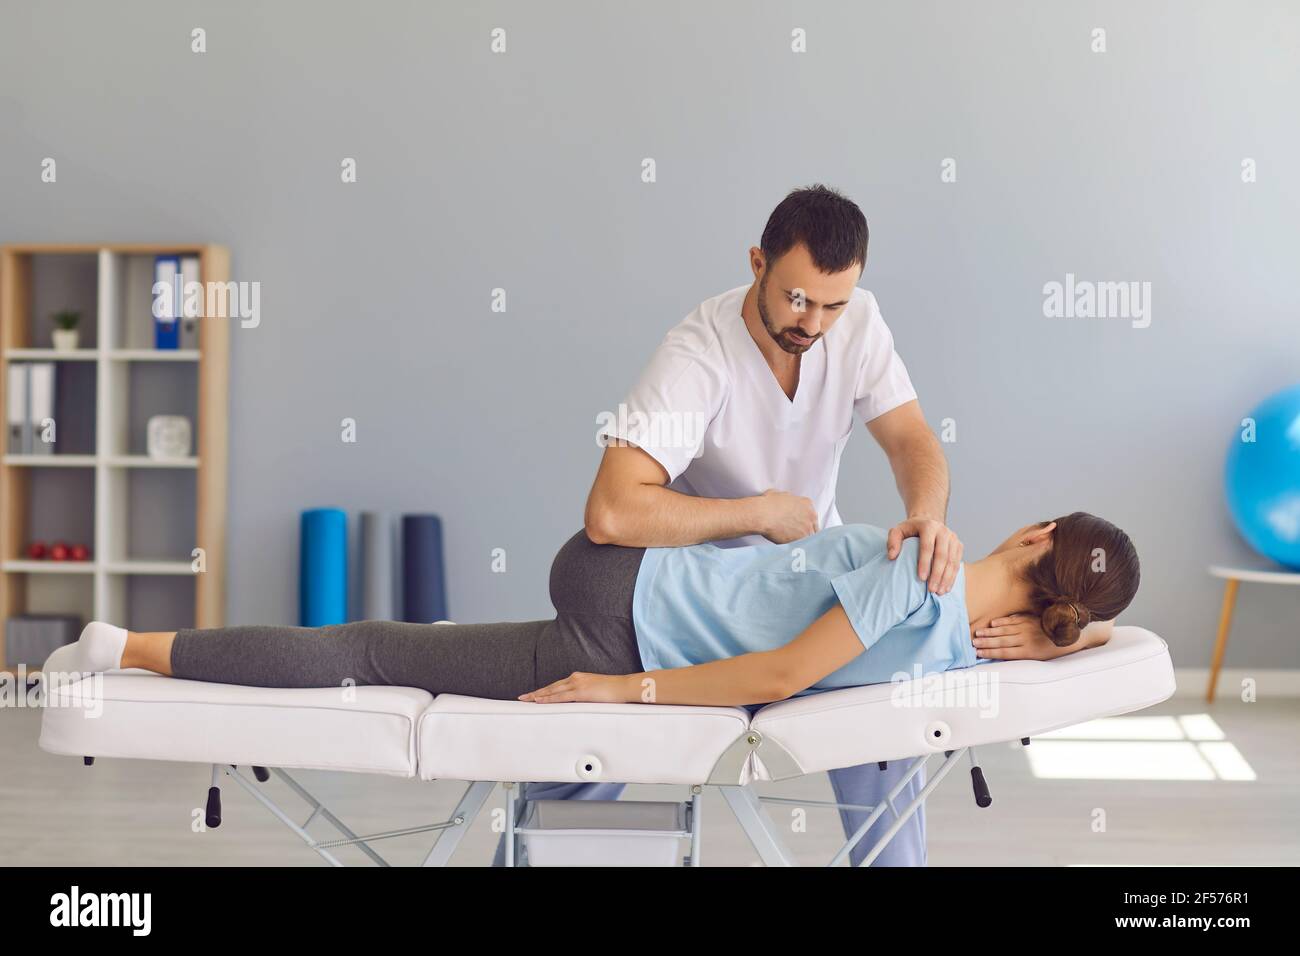 Confident man doctor chiropractor or osteopath fixing womans back and legs joints Stock Photo